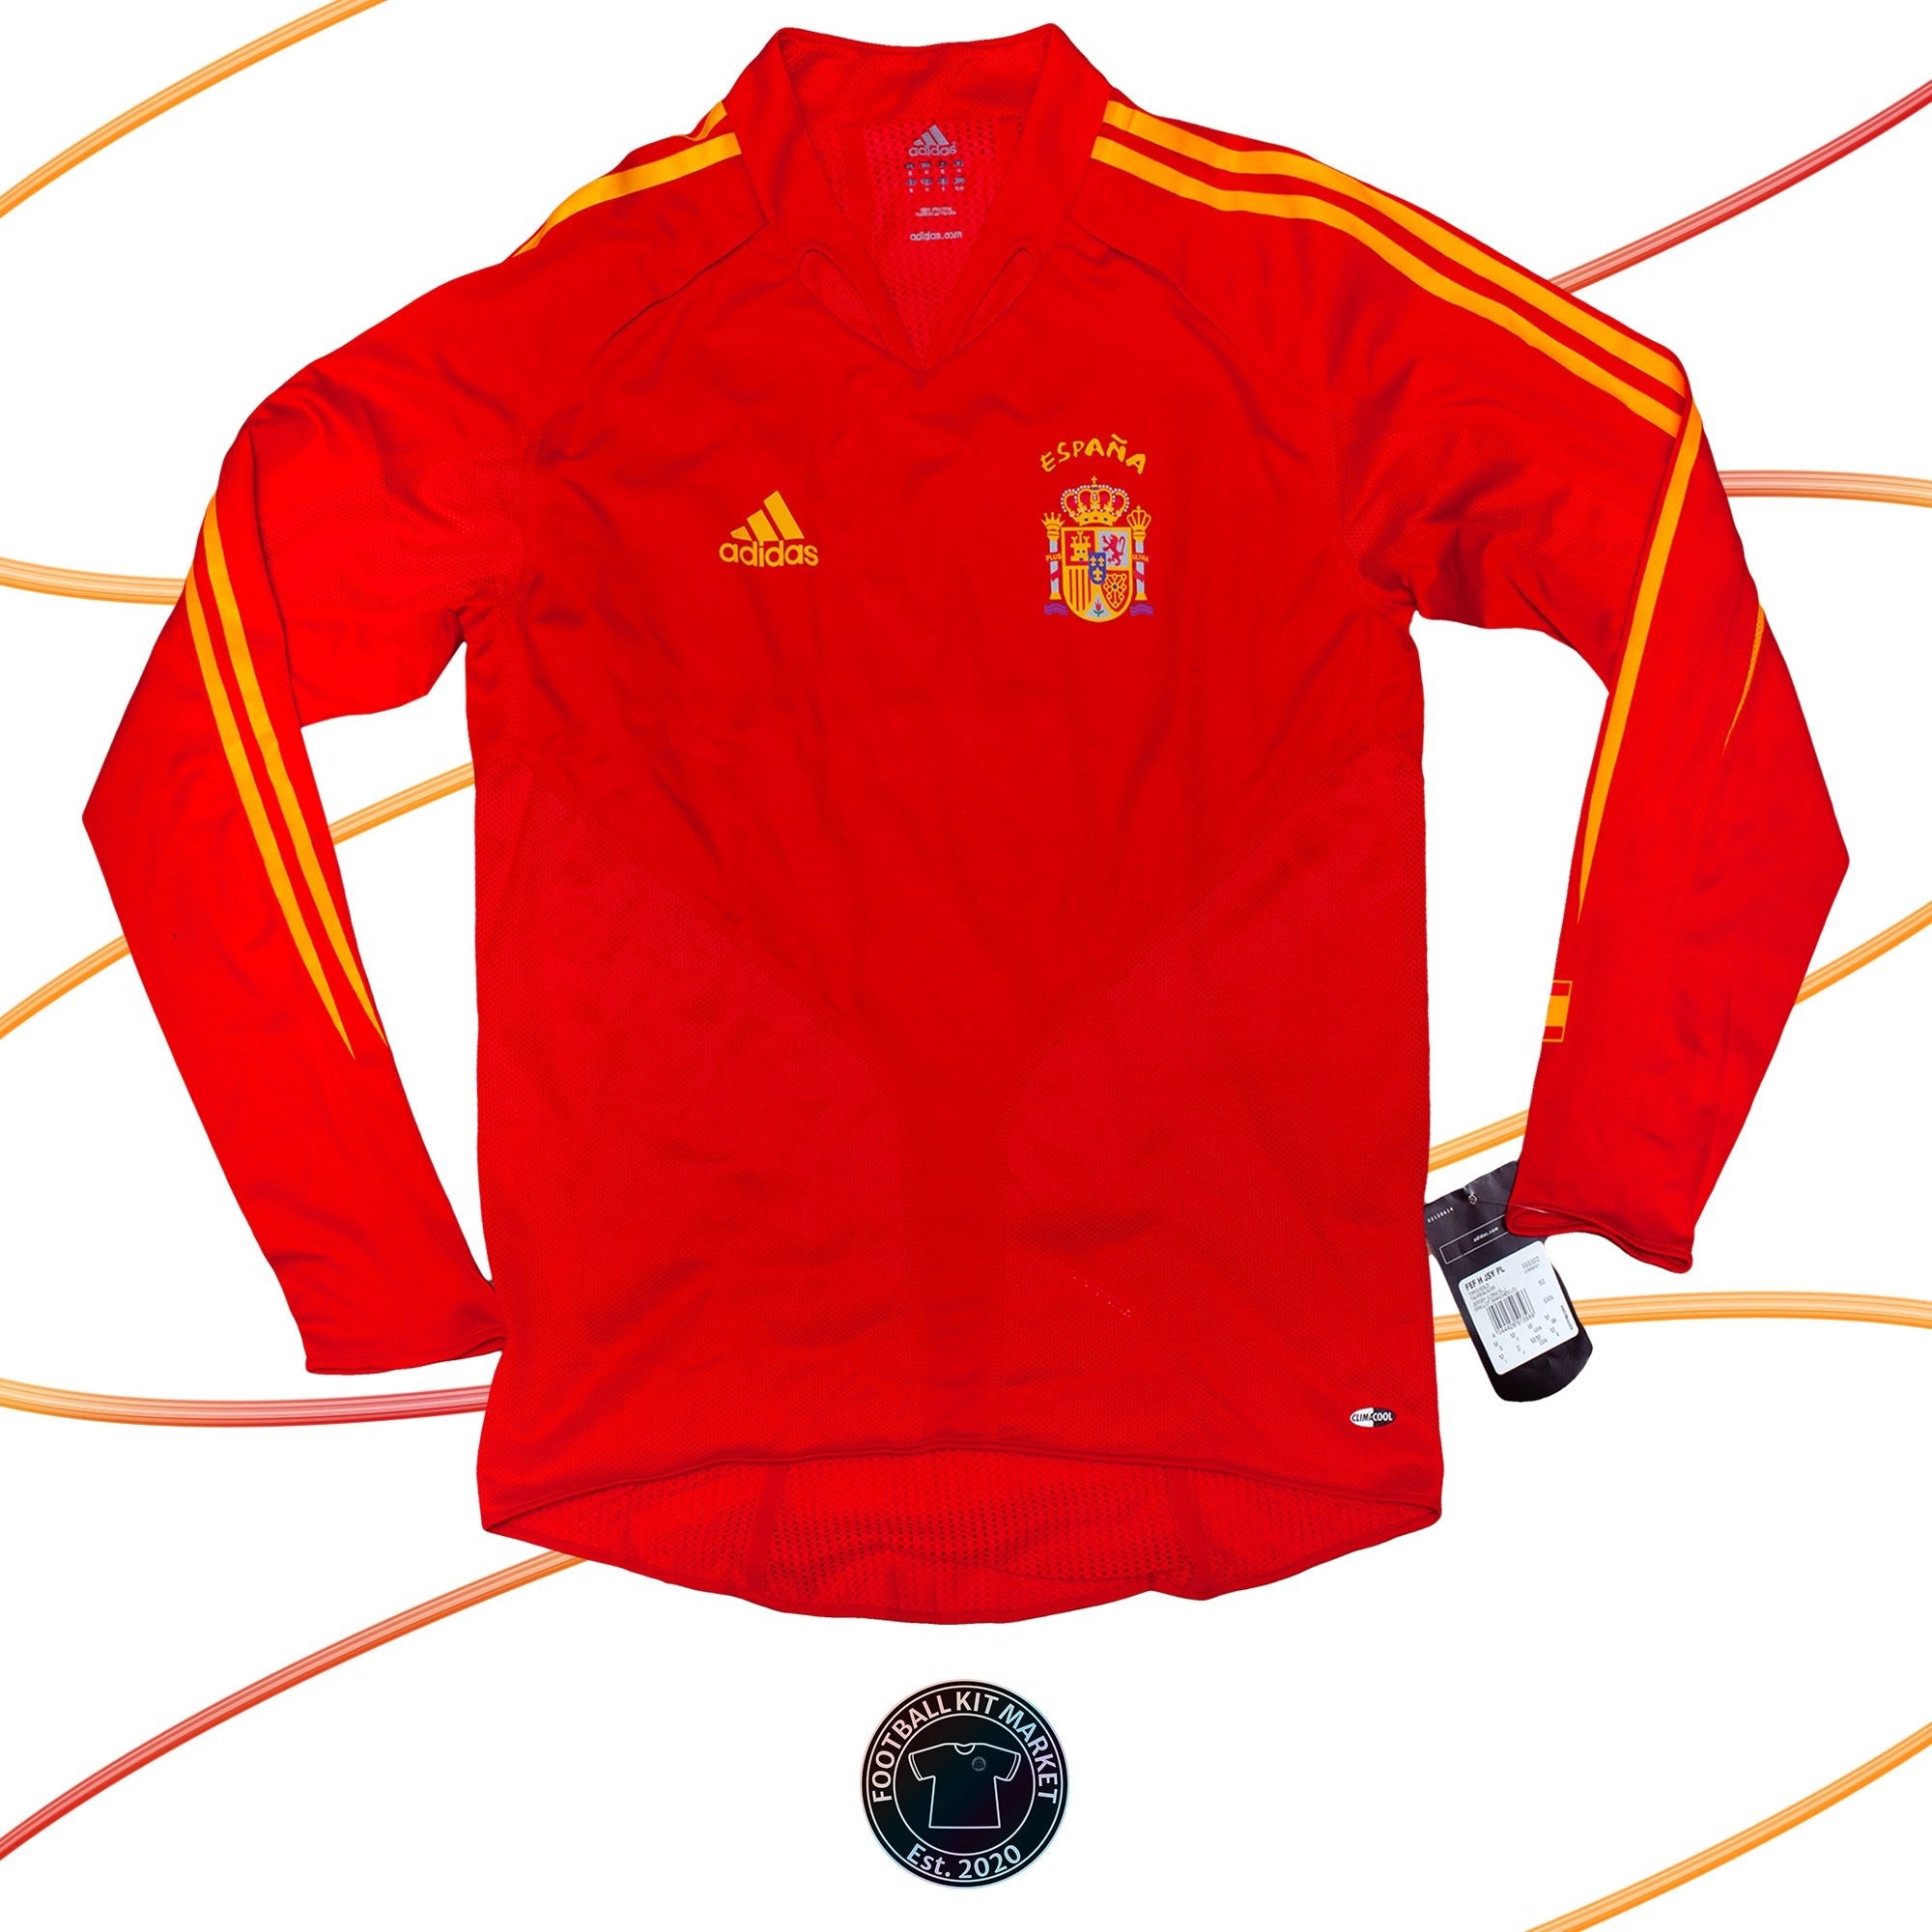 Genuine SPAIN Home (2003-2005) - ADIDAS (M) - Product Image from Football Kit Market